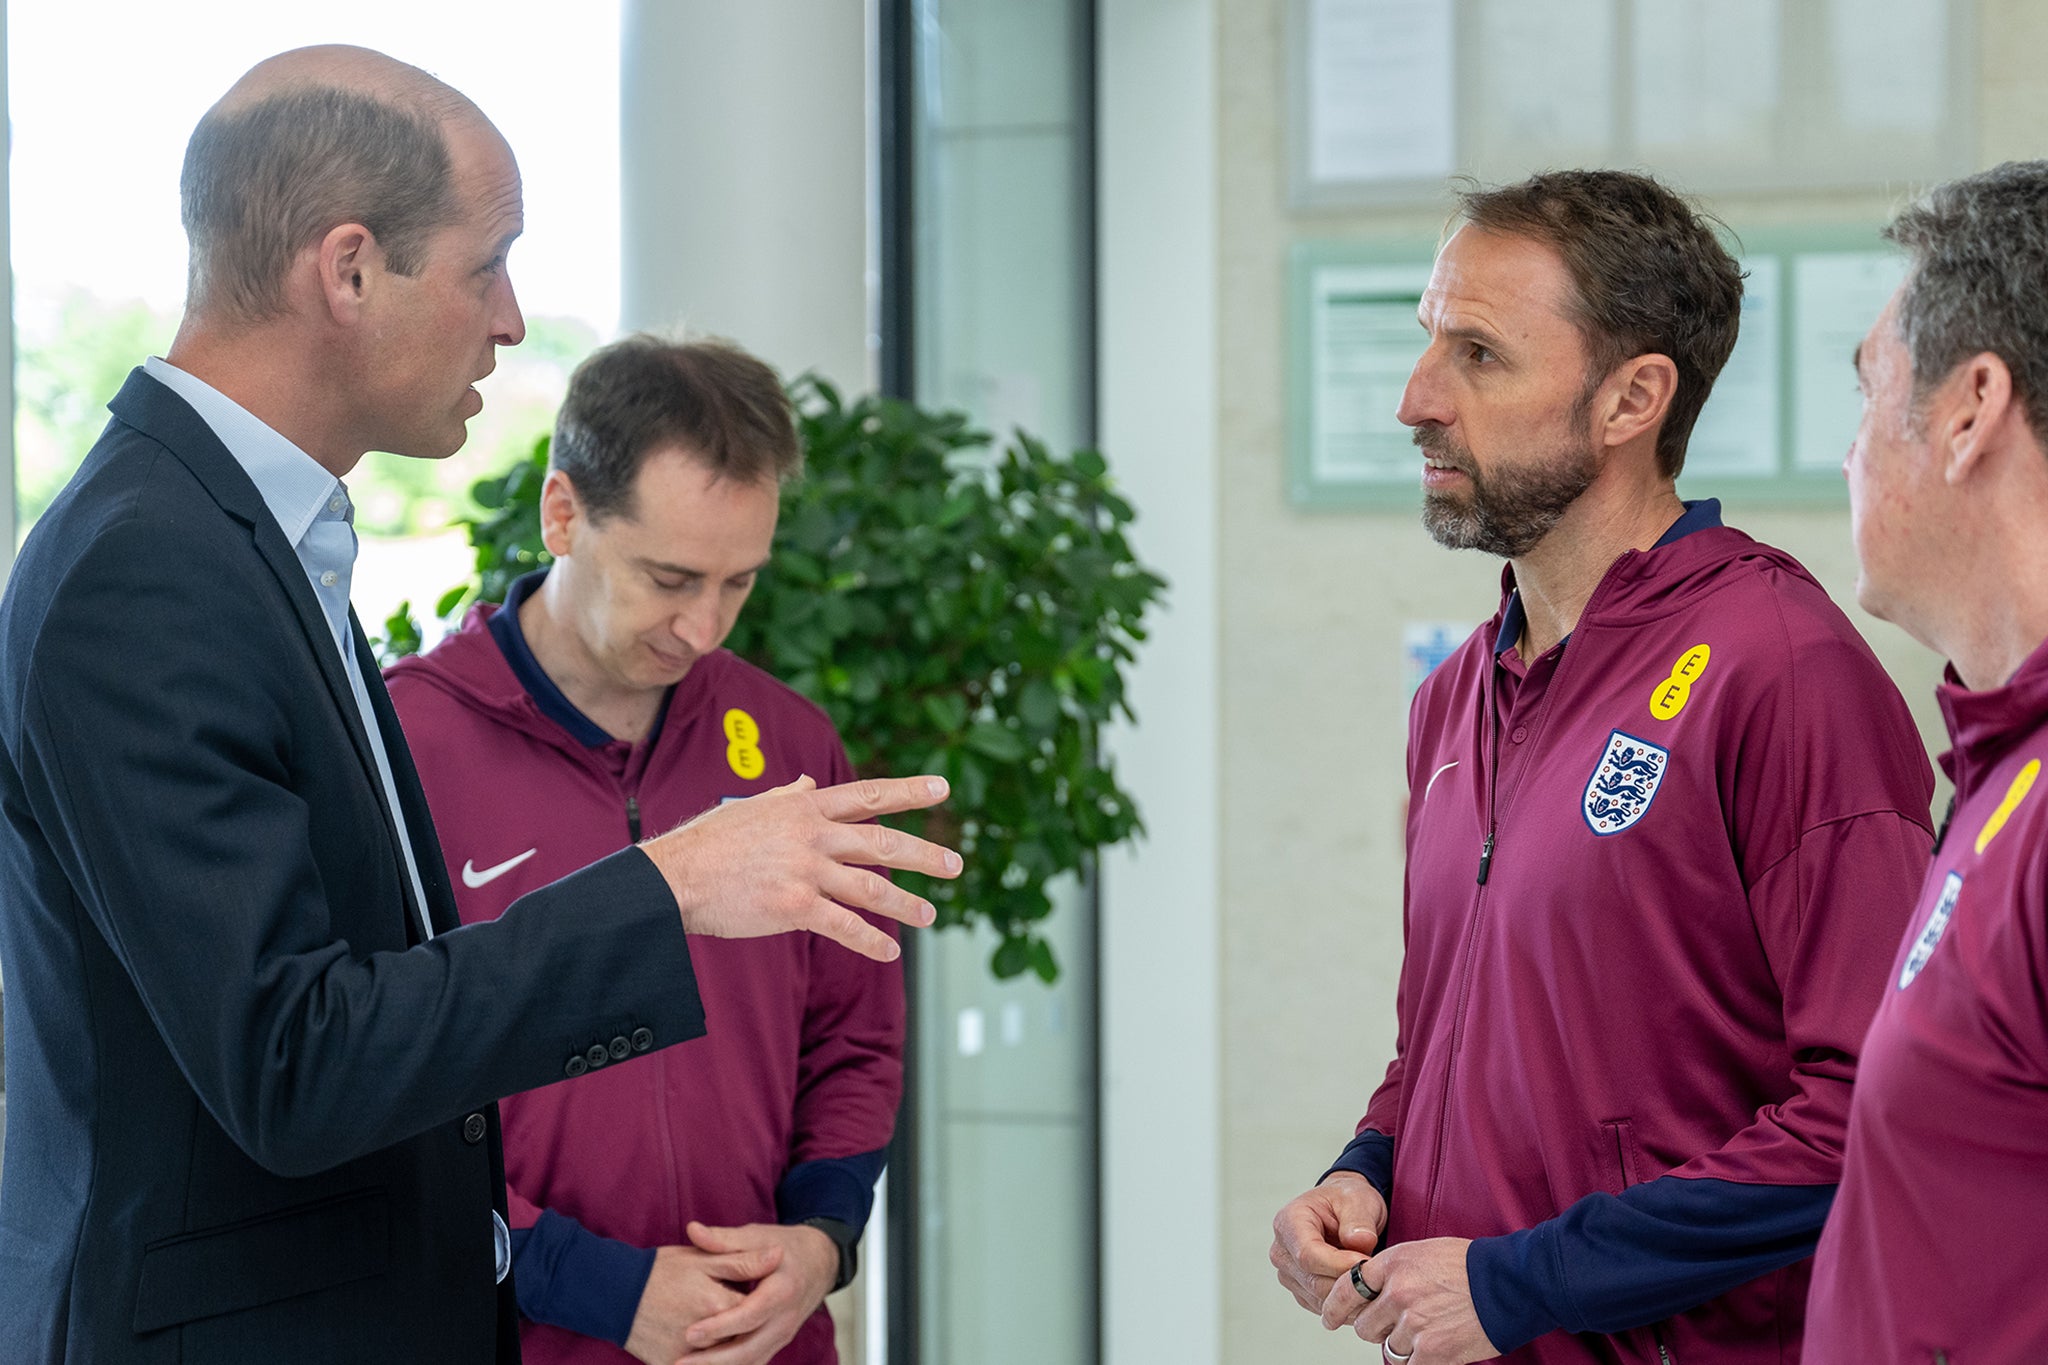 Prince William met the England squad ahead of this year's Euros